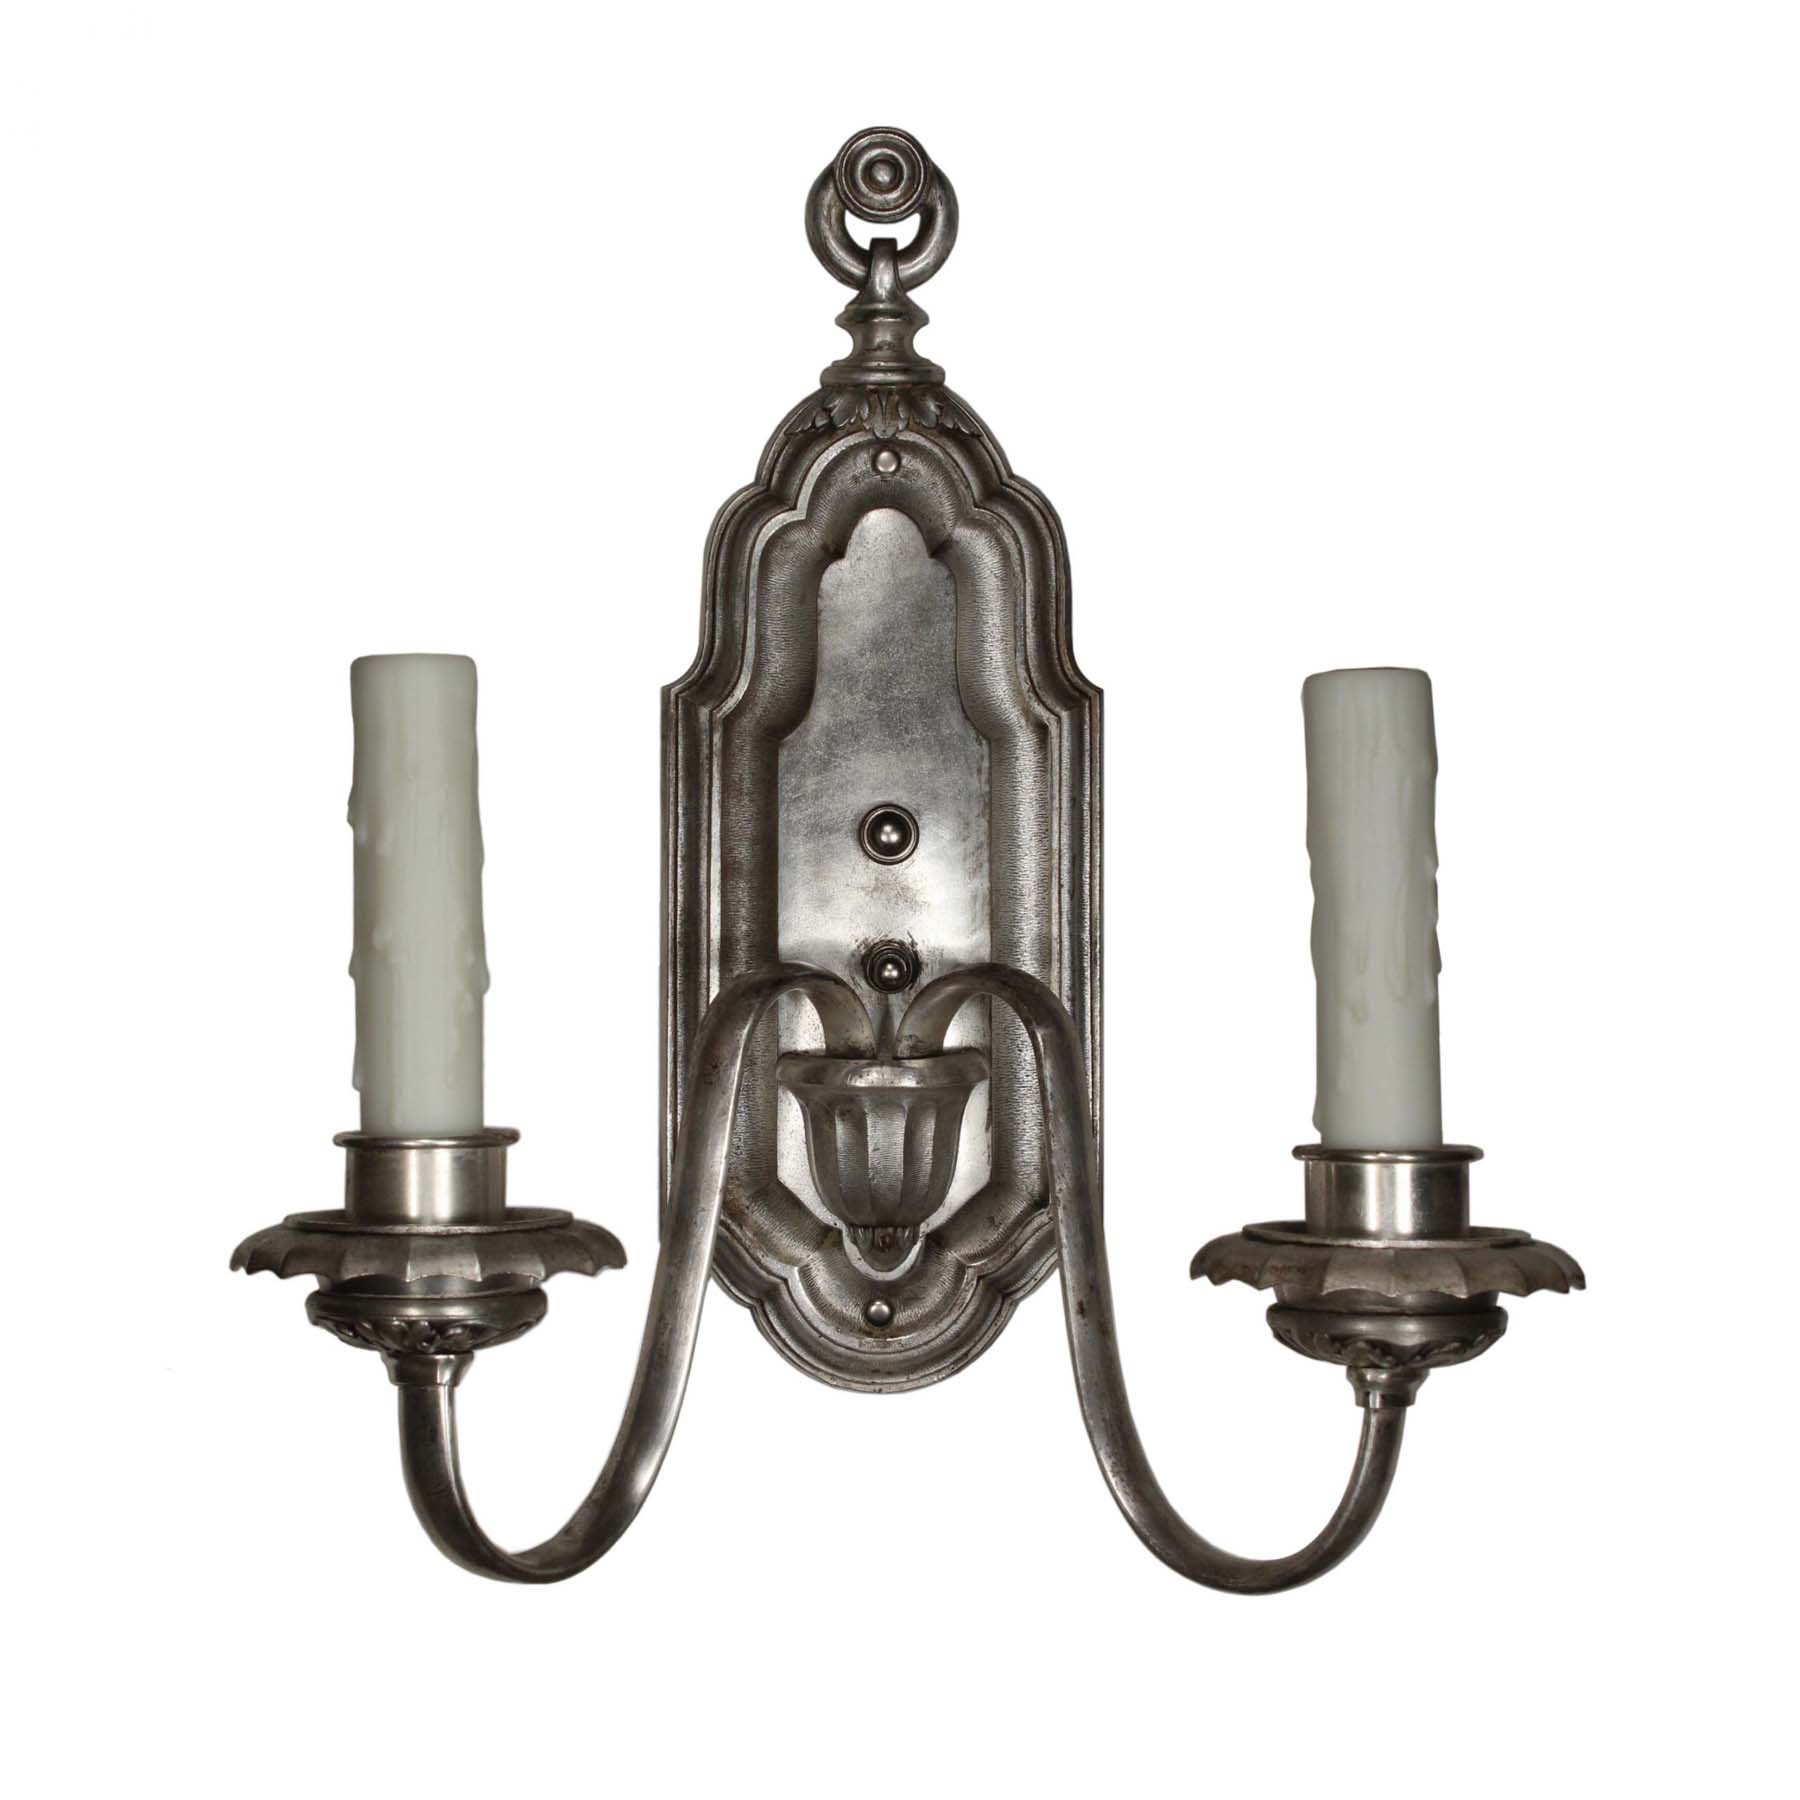 Pair of Silver Plated Neoclassical Sconces Signed Edward Miller, Antique Lighting-64359